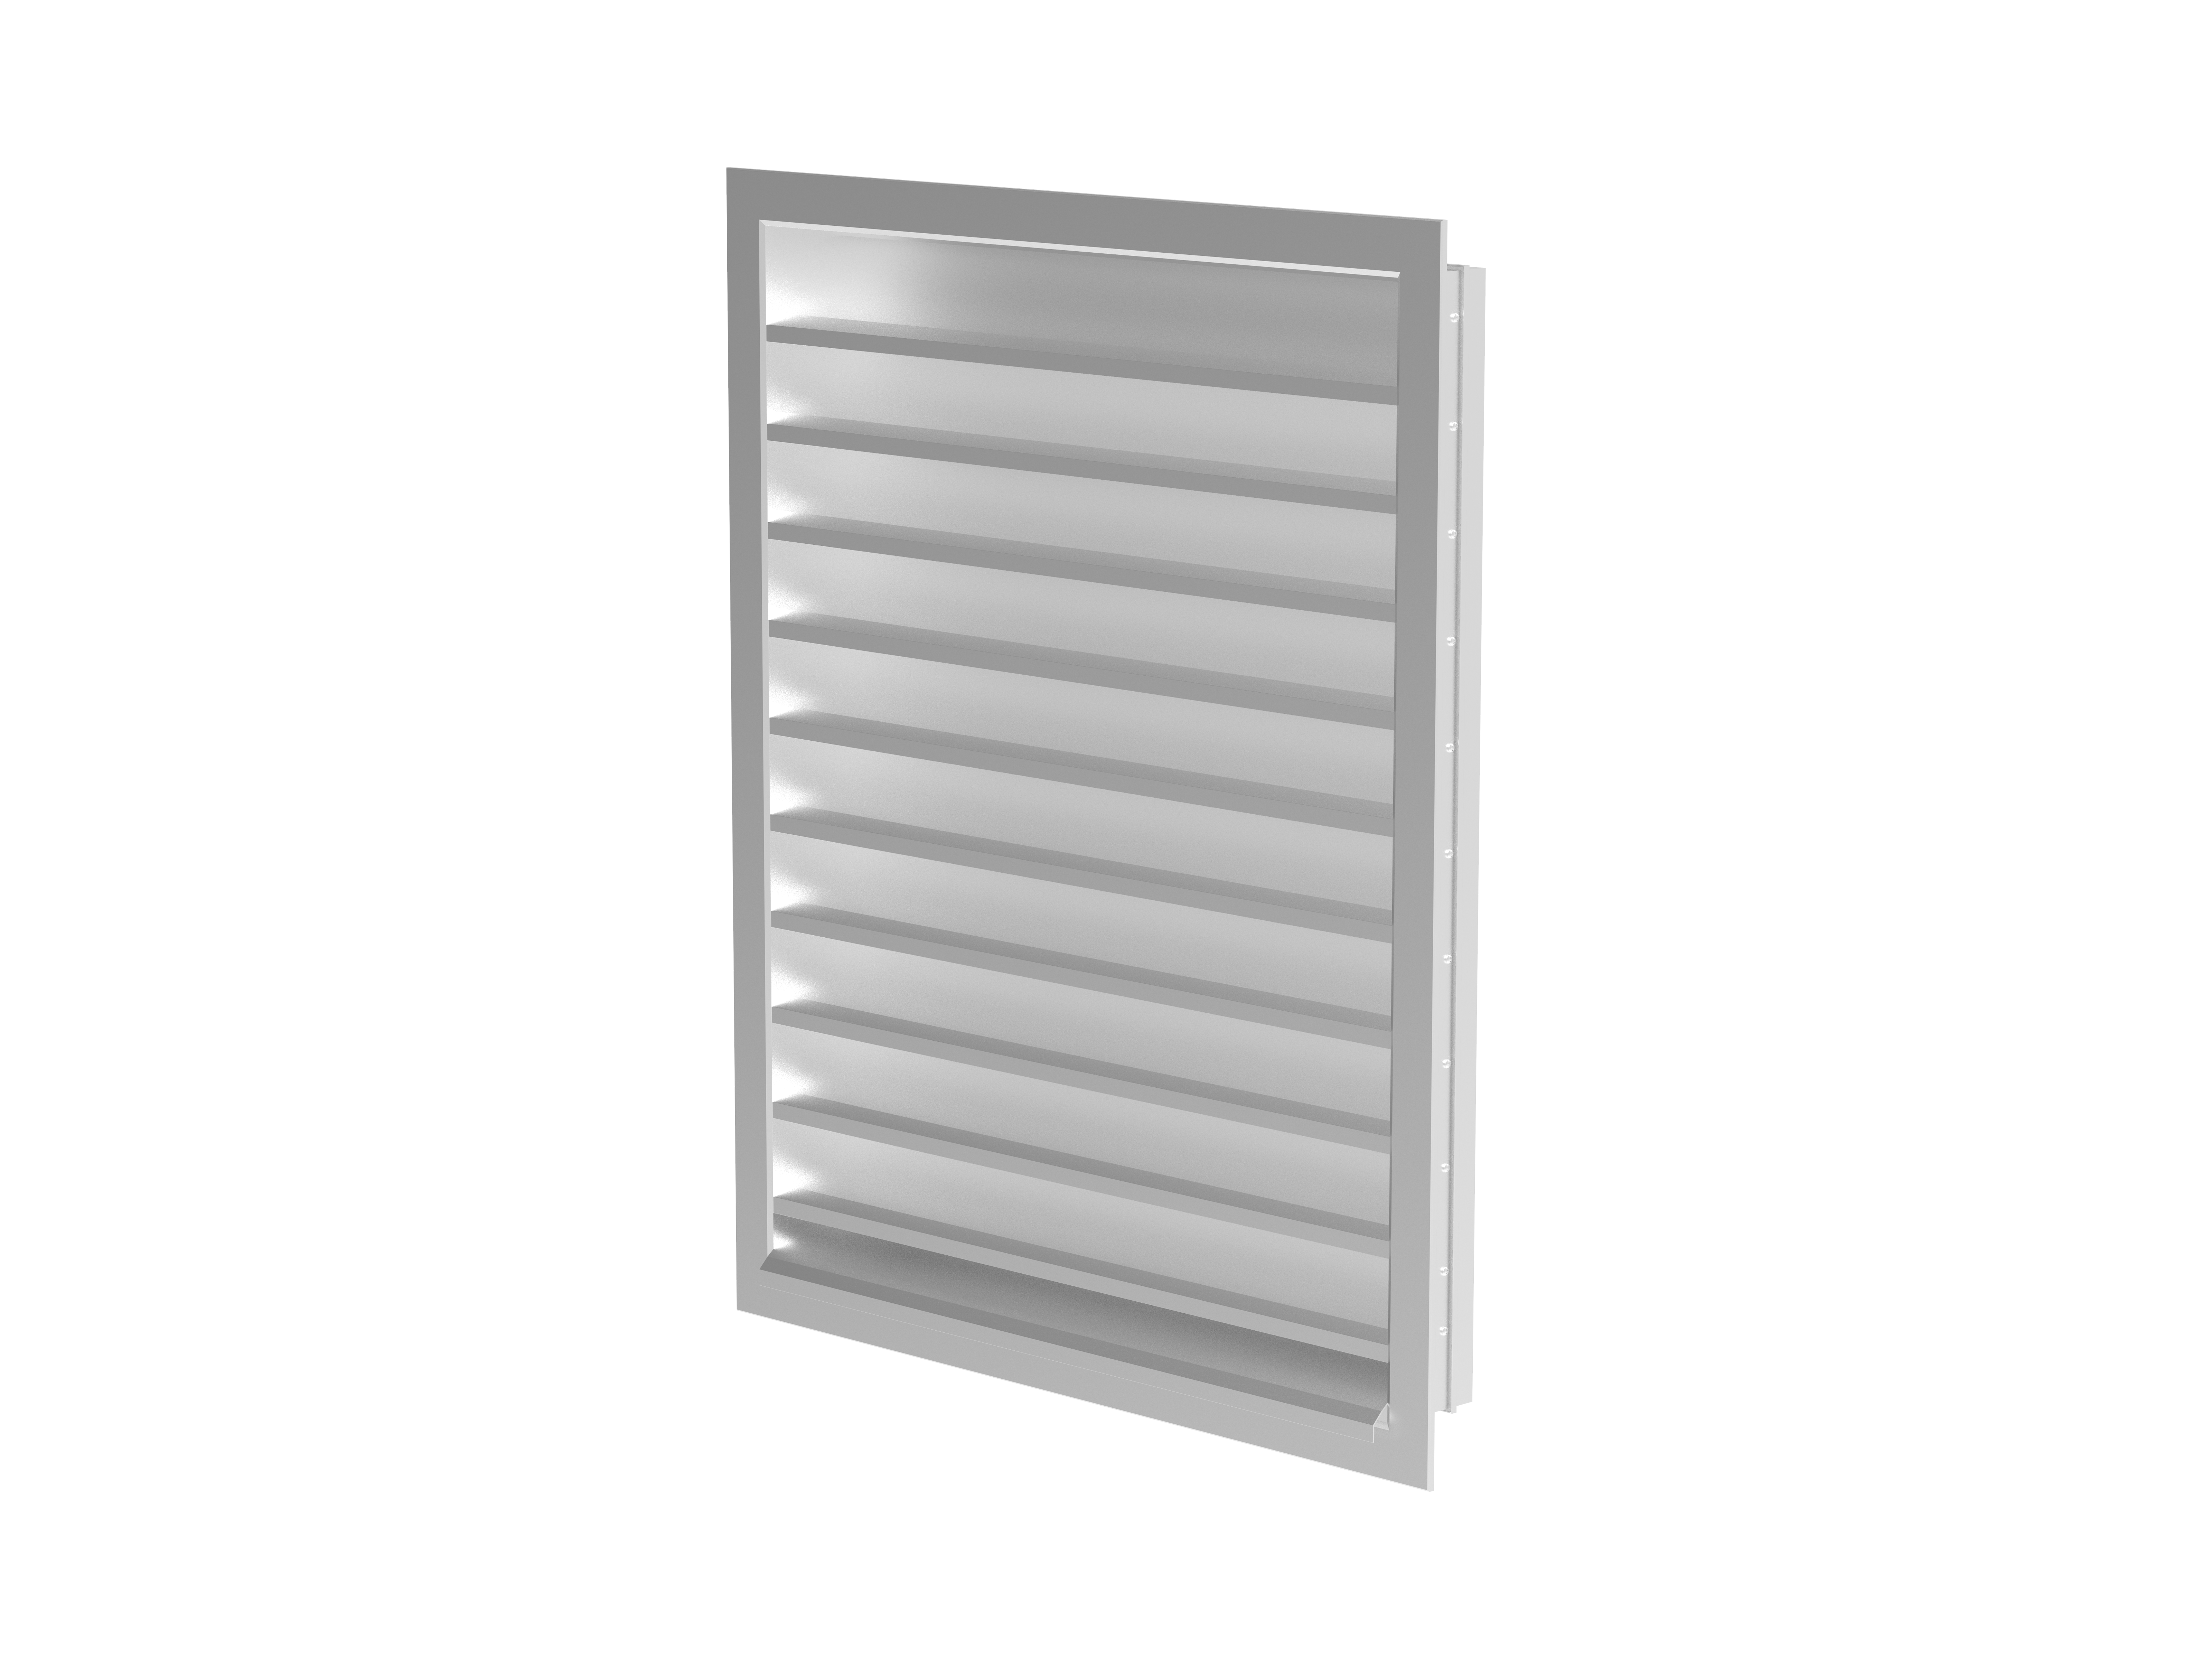 PZALS - Louvres - Air Distribution Products - Products - Systemair